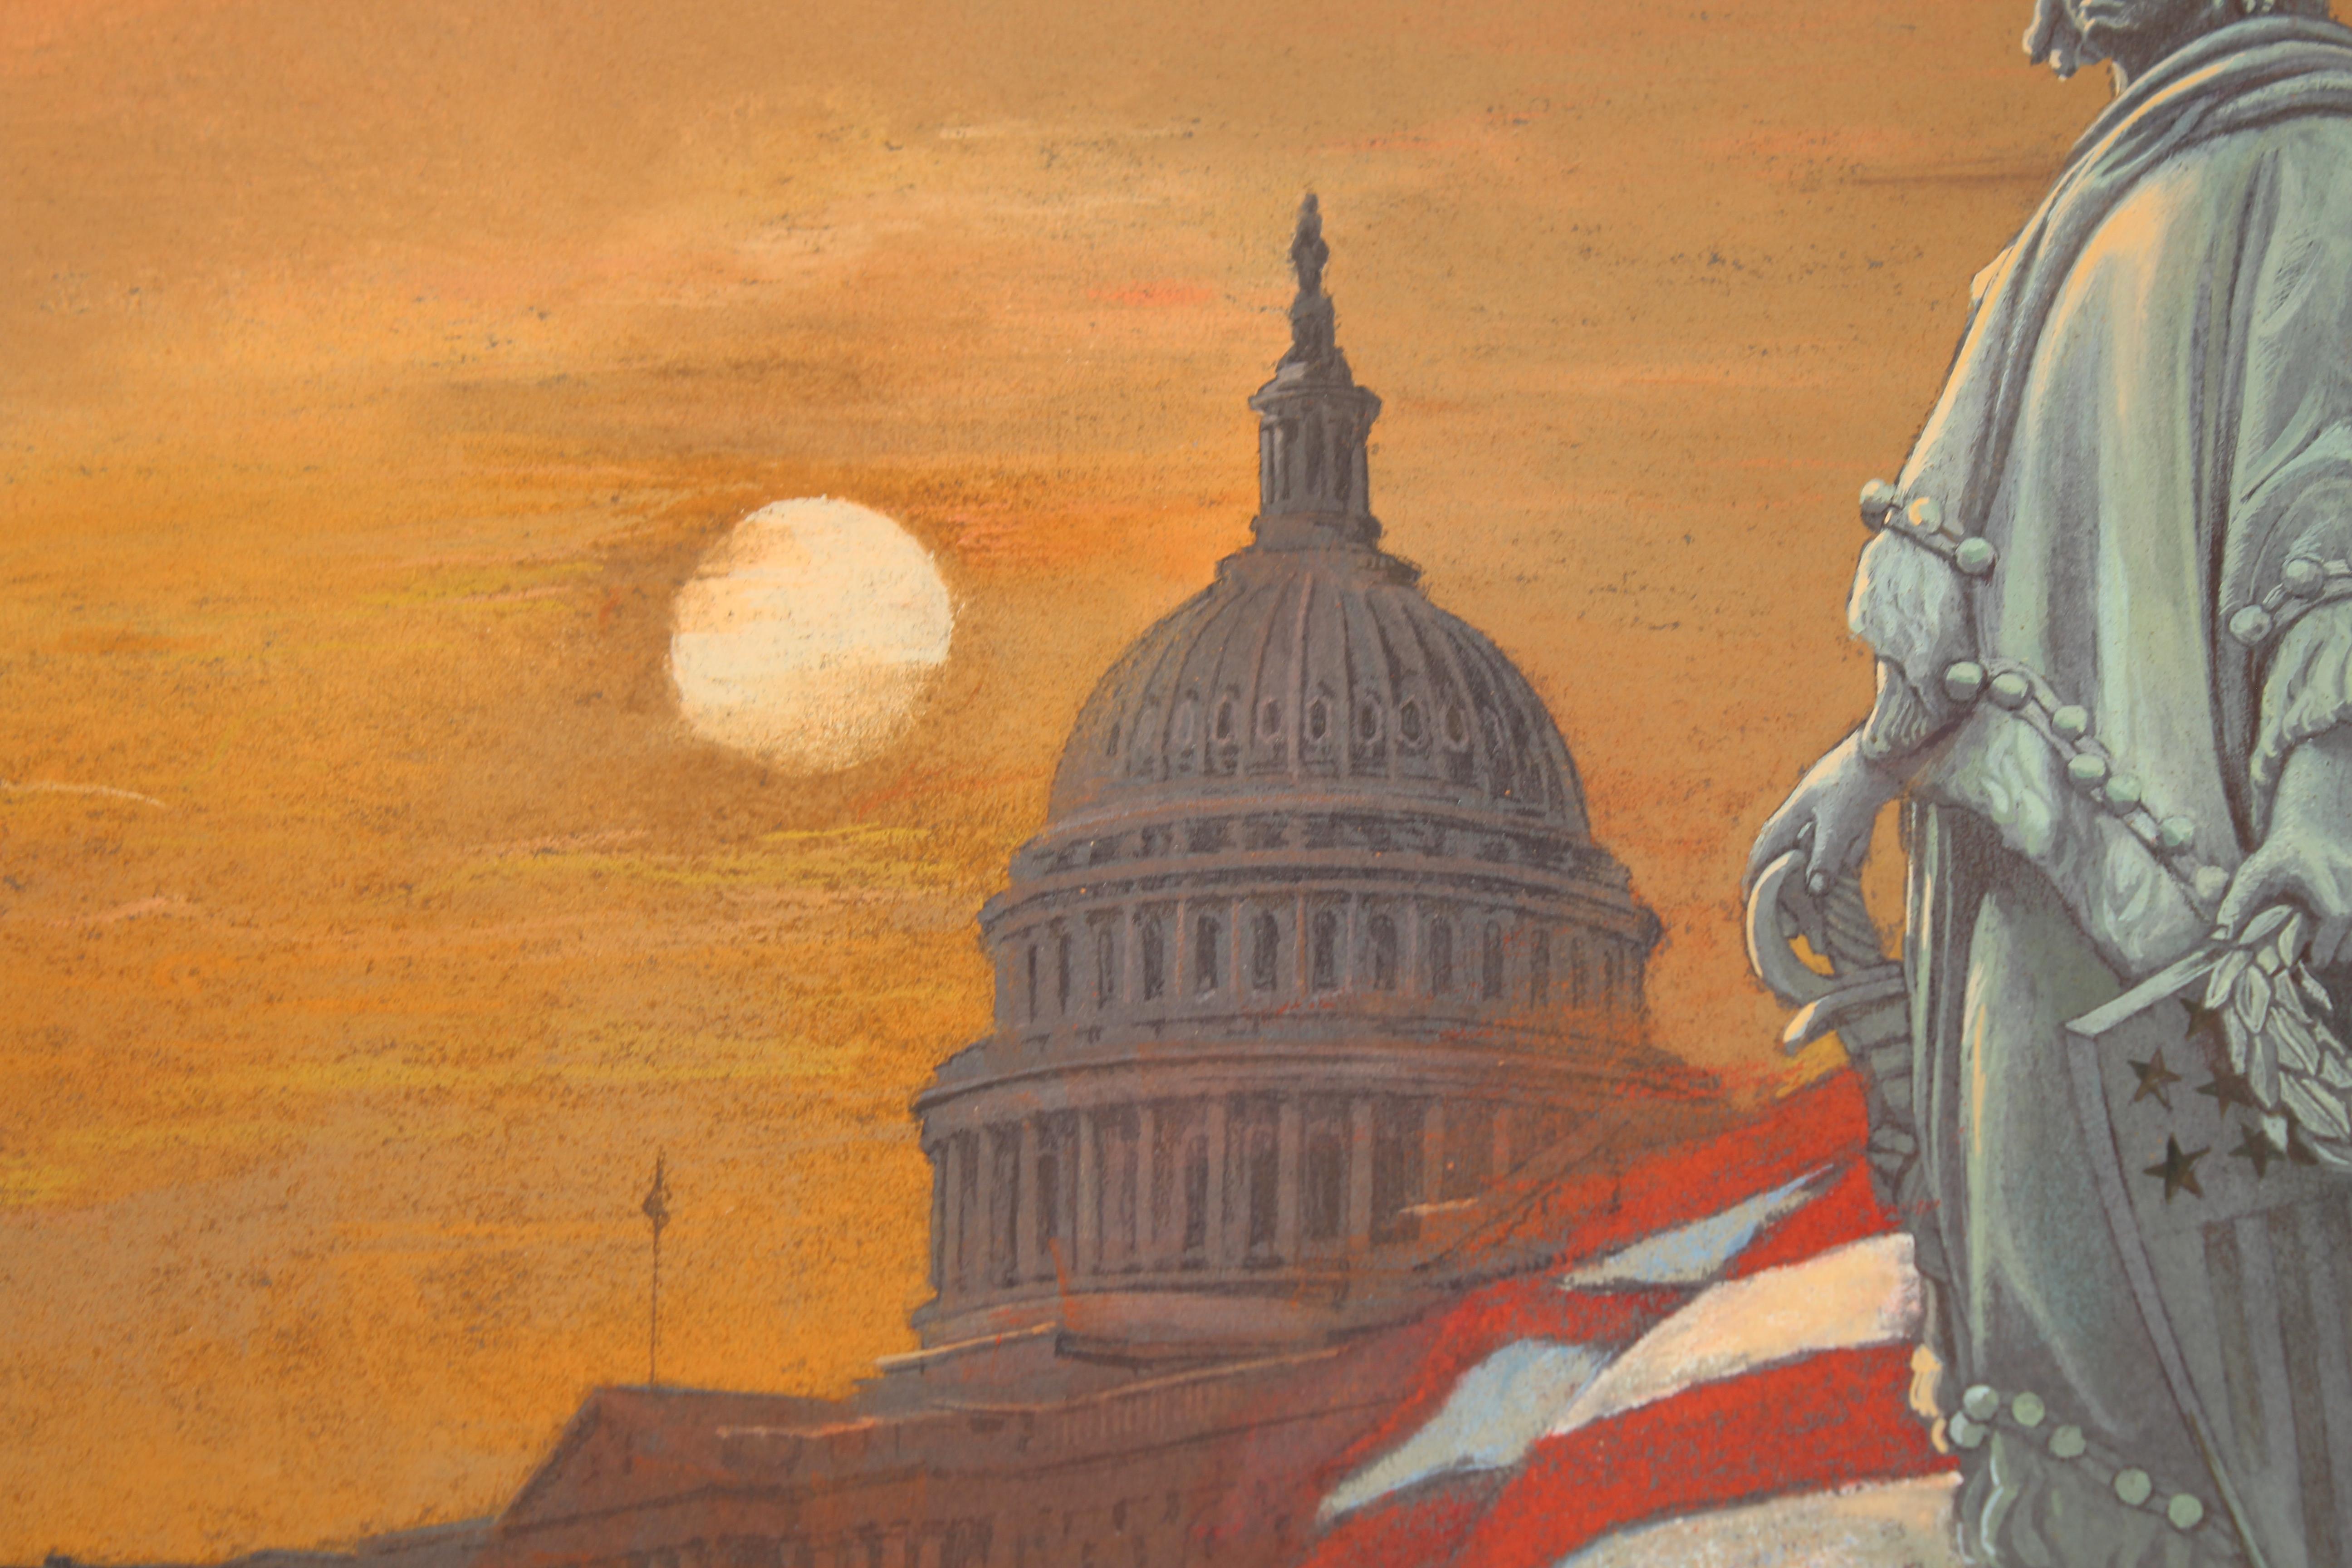 Presented is “Statue of Freedom,” an original chalk drawing by American artist Tom Lydon. The drawing shows an intricately detailed rendering of the Statue of Freedom, at the lower right of the composition. Behind the statue is a waving American